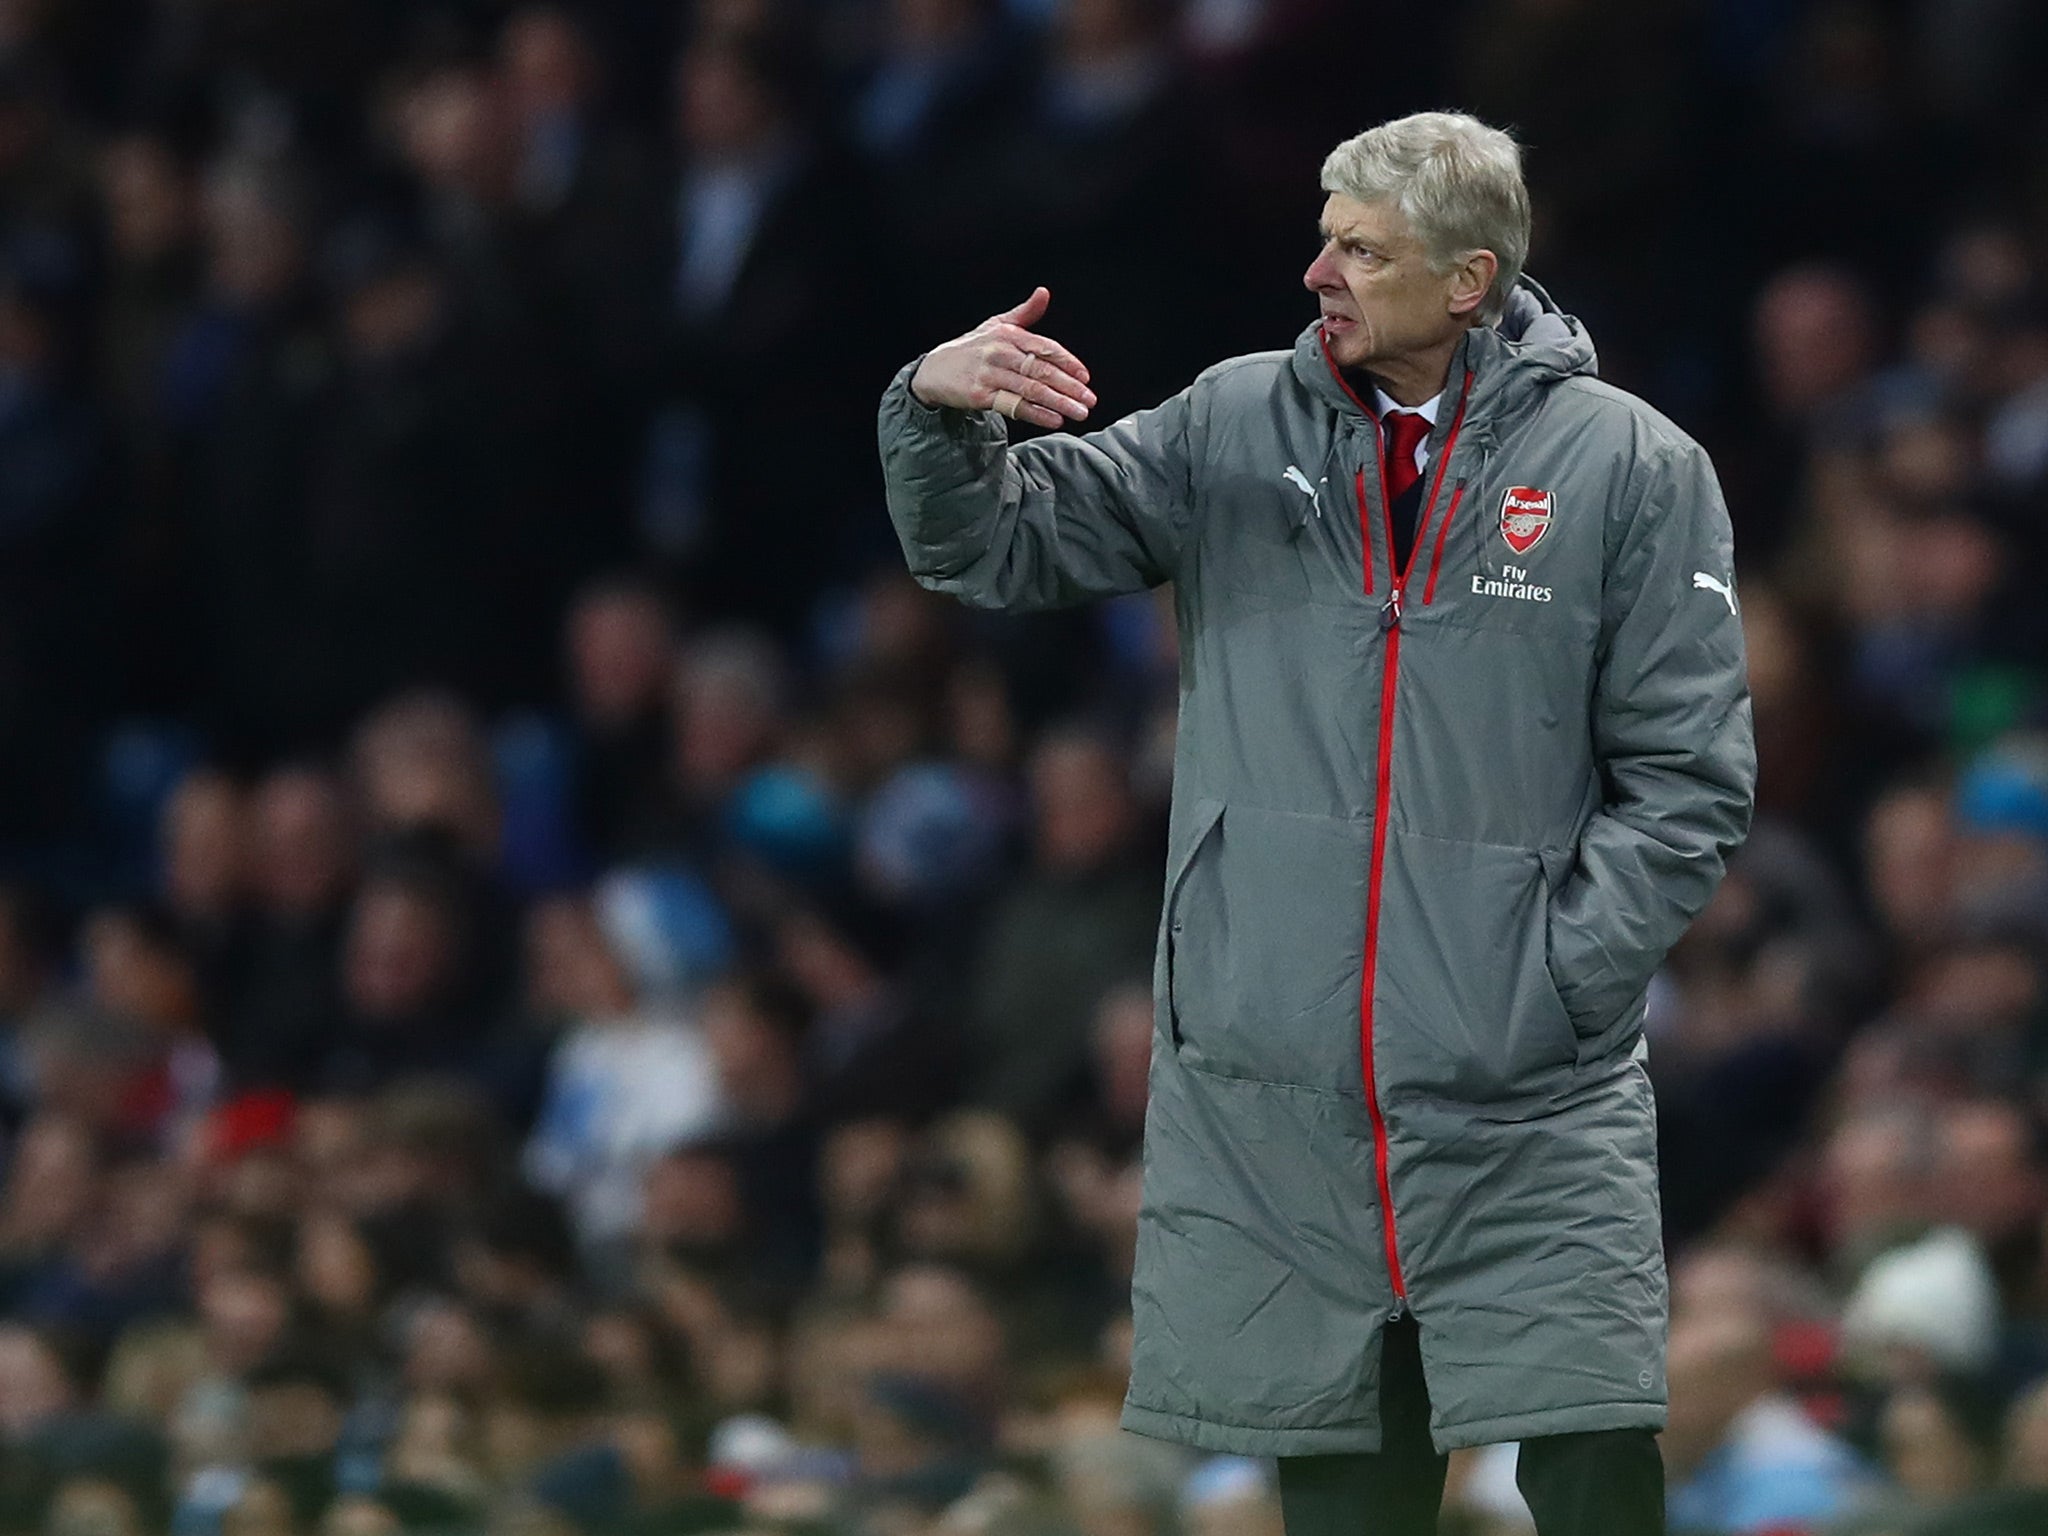 Wenger's team are incapable of holding their own when a storm hits